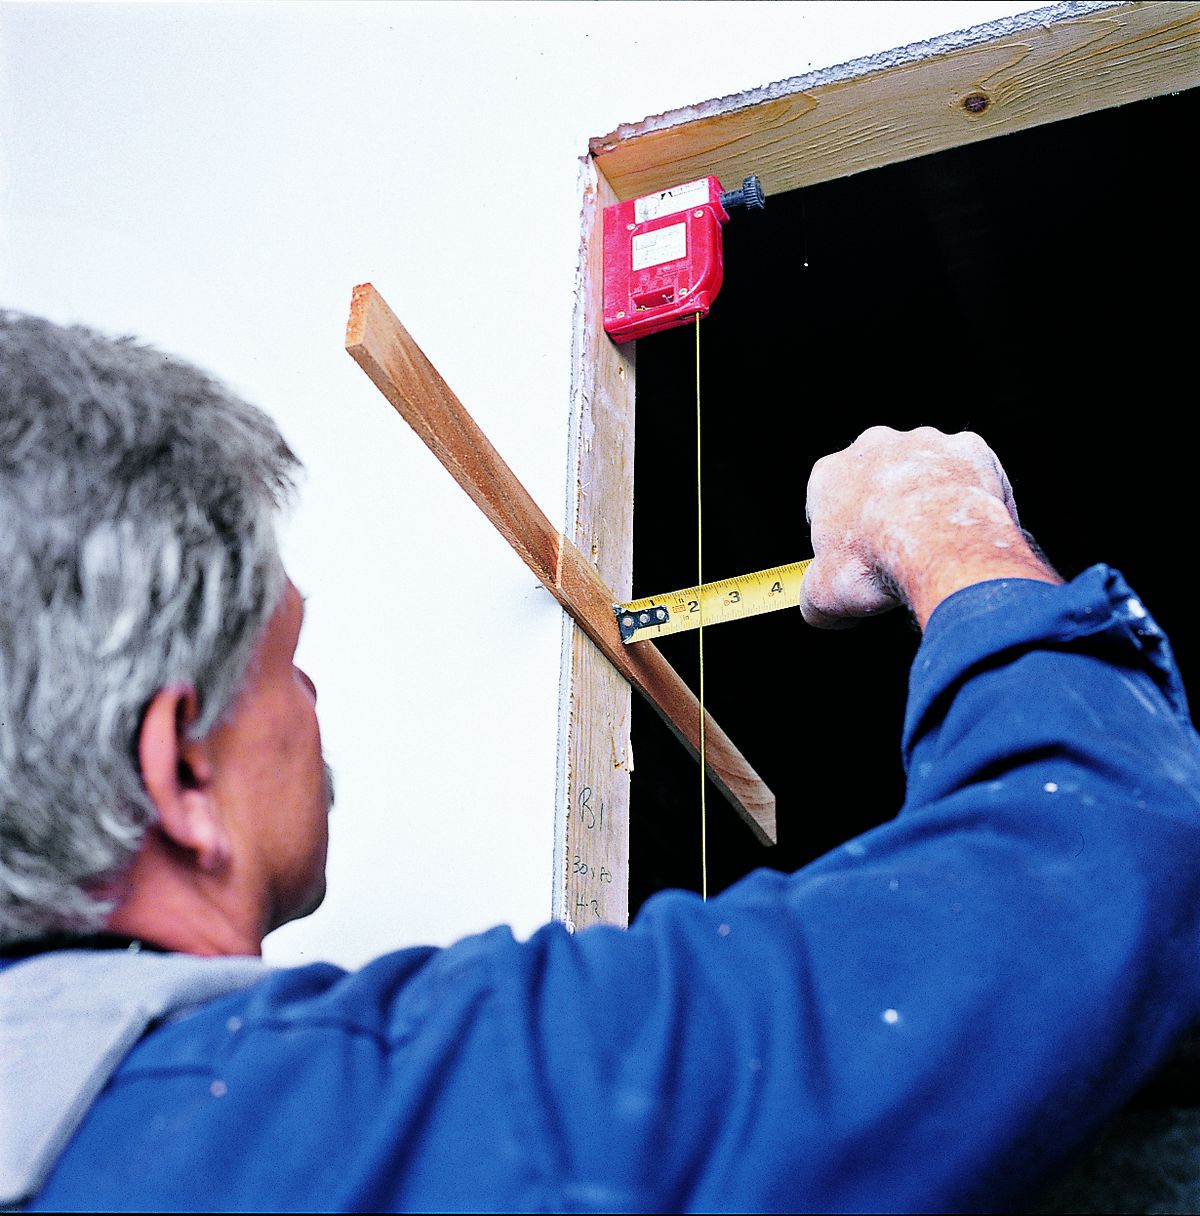 Man Taking Measurements With Plumb Bob To Place Shims